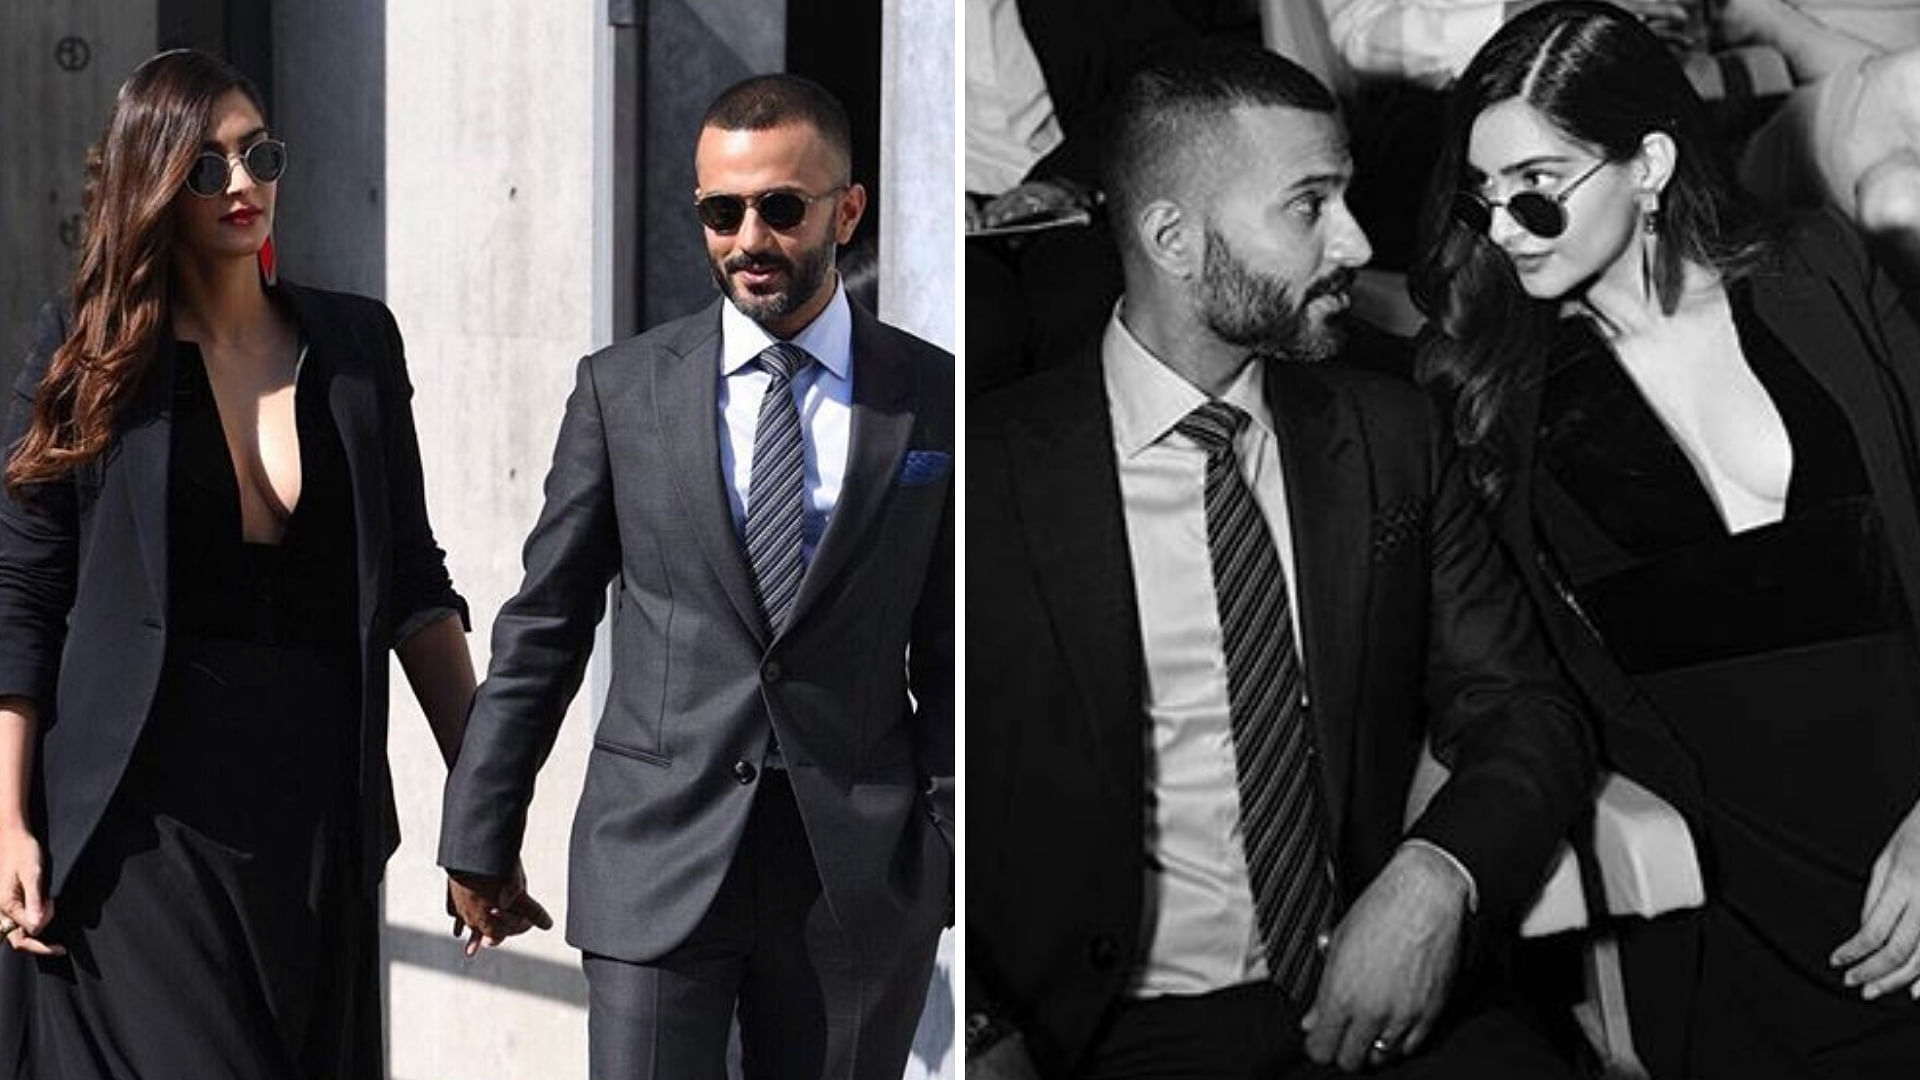 Actor Sonam Kapoor Ahuja and her husband and businessman Anand S. Ahuja flew to Milan to attend a fashion show on an invitation by veteran designer Giorgio Armani.